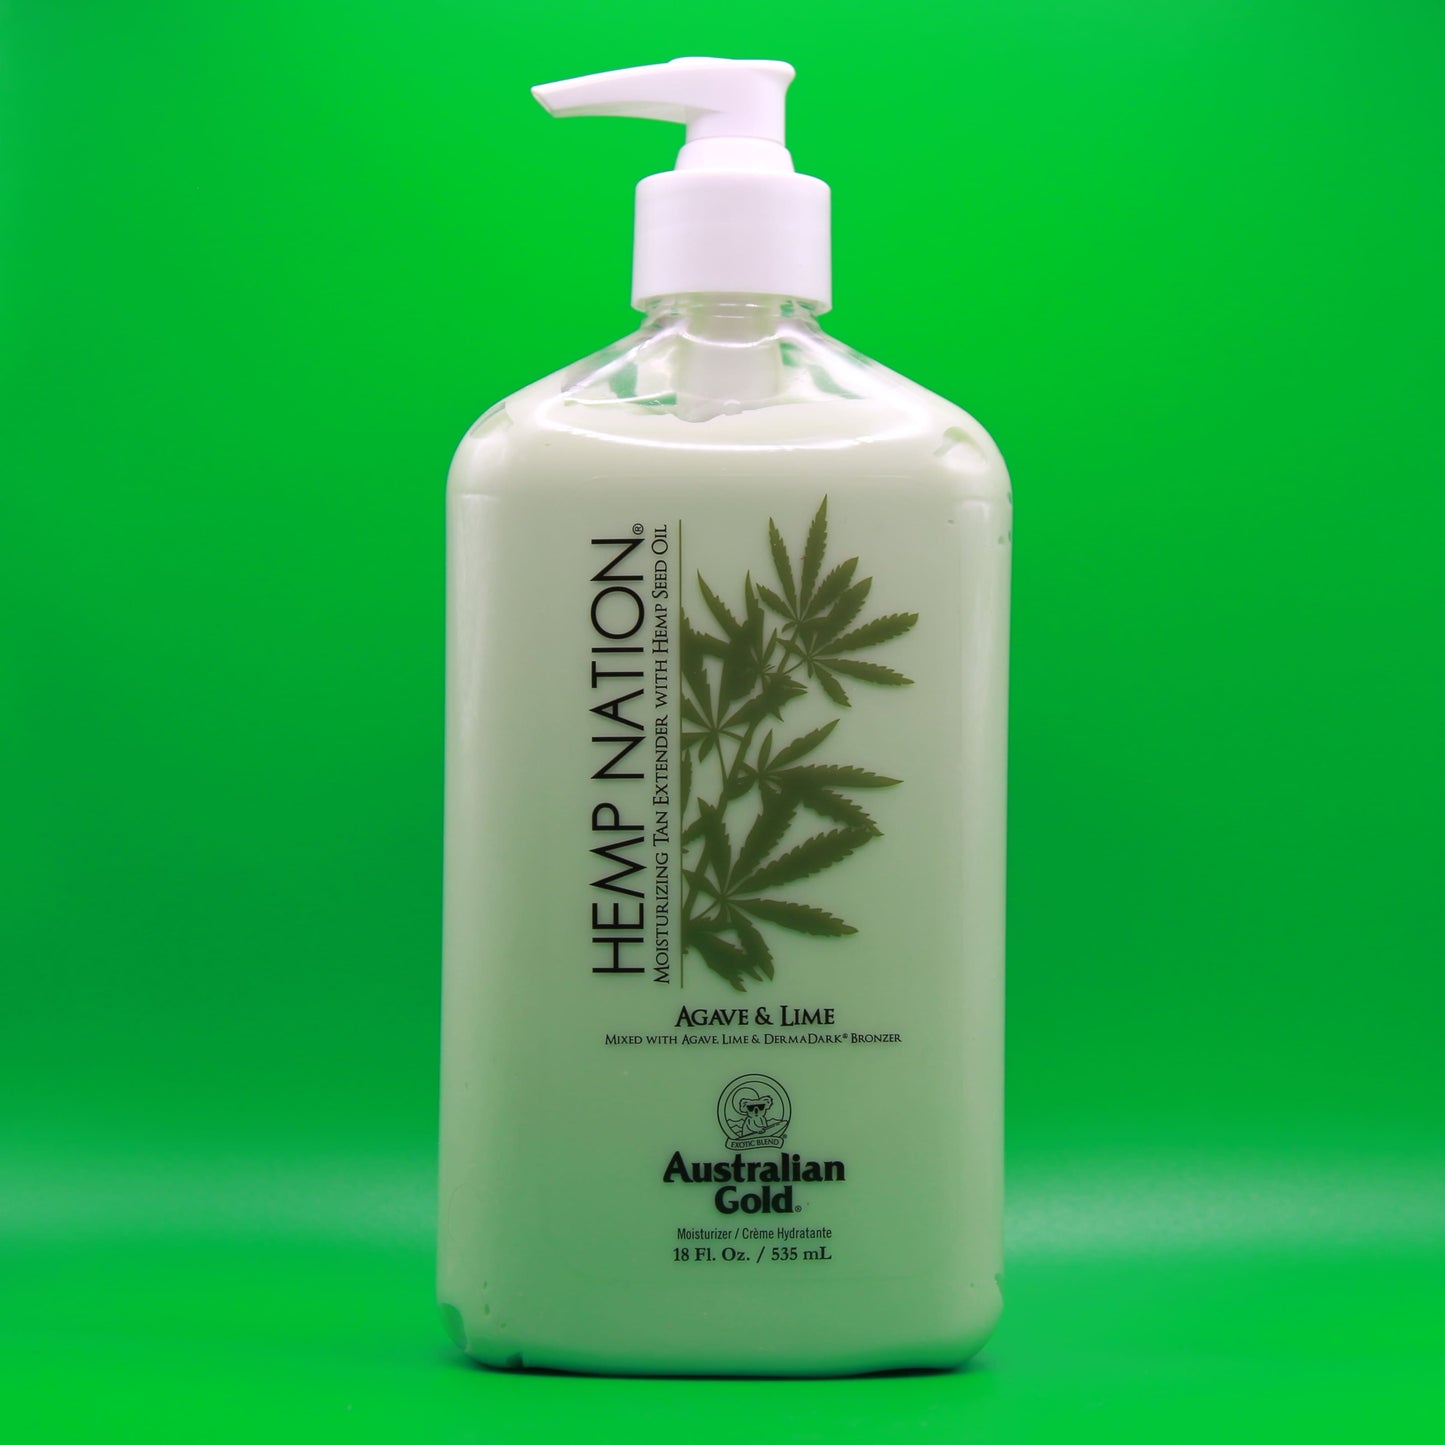 Australian Gold - Agave & Lime Body Lotion